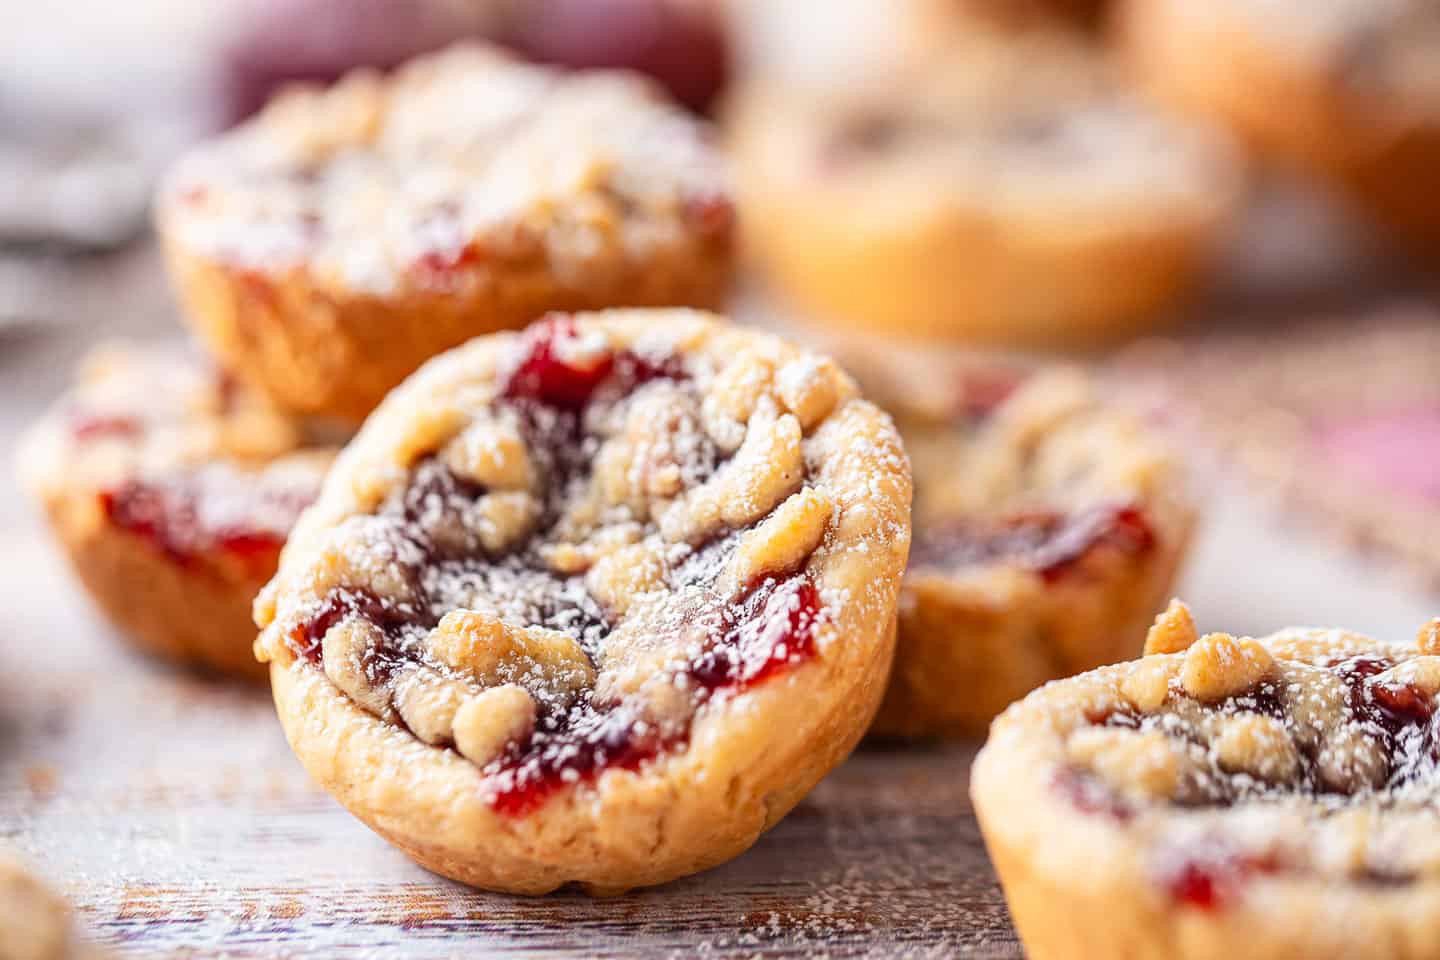 Raspberry tartlets filled with jam and topped with streusel and powdered sugar.